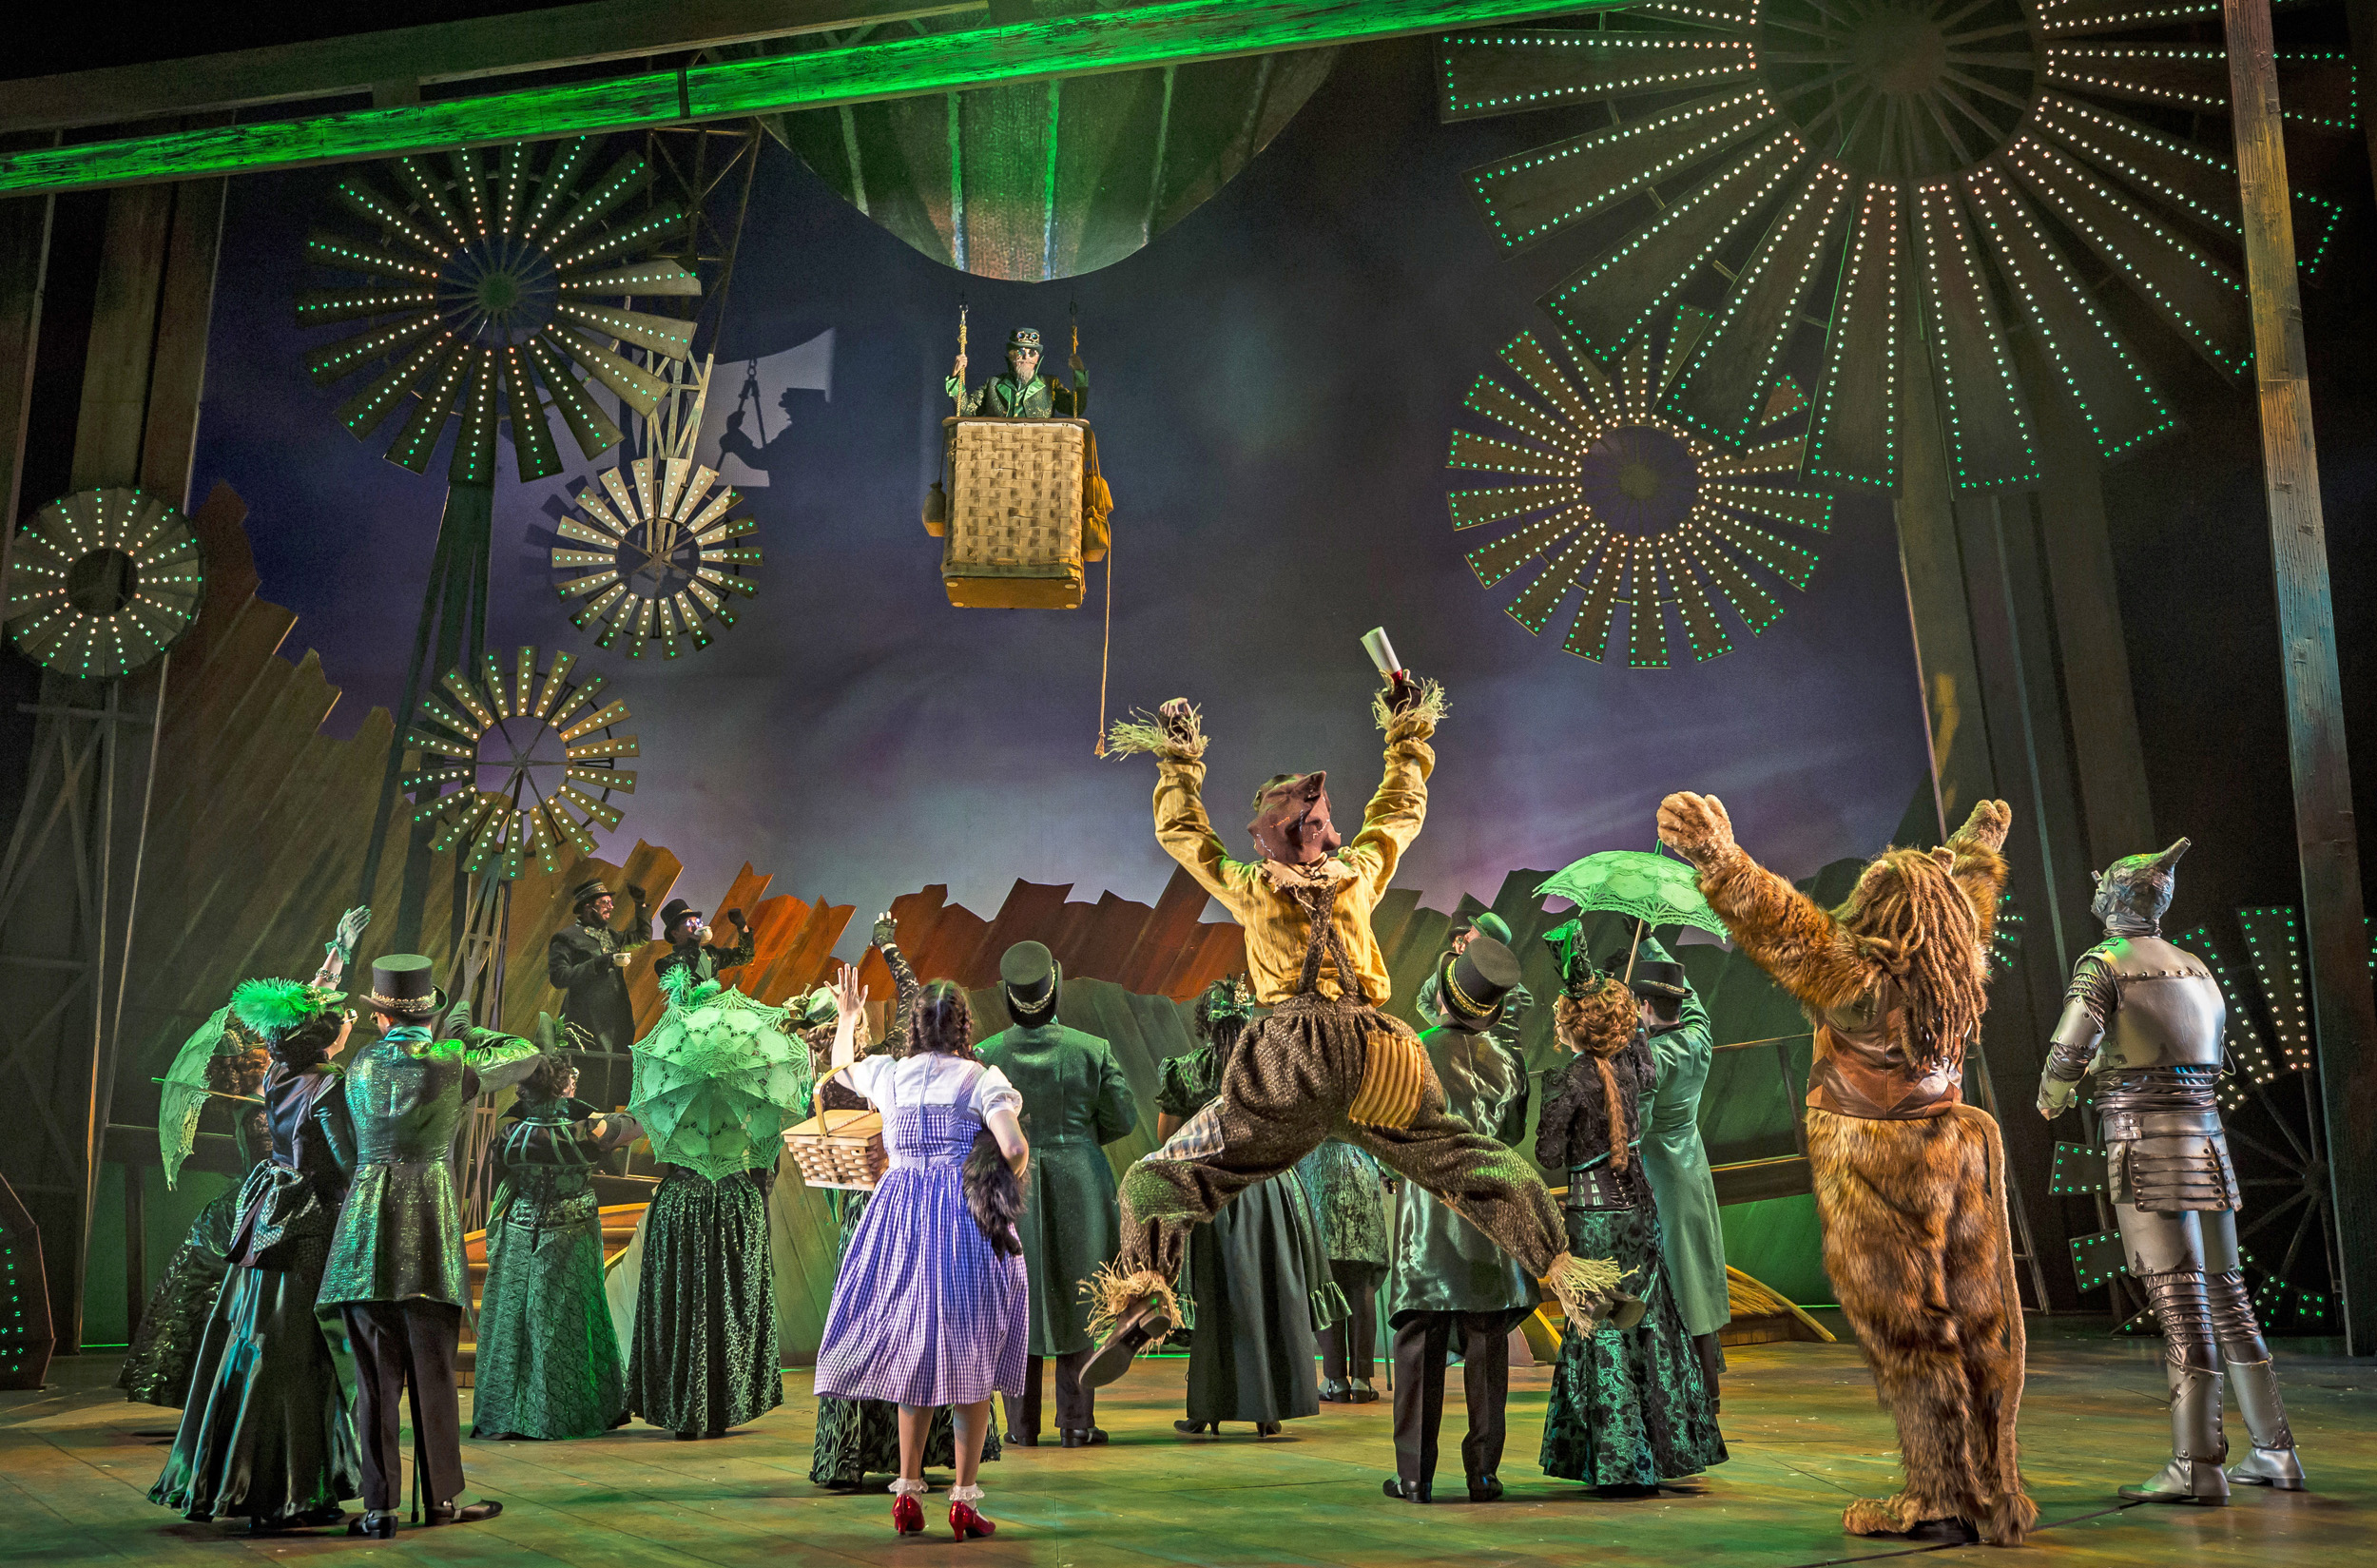 The Wizard of Oz - Theatrical.